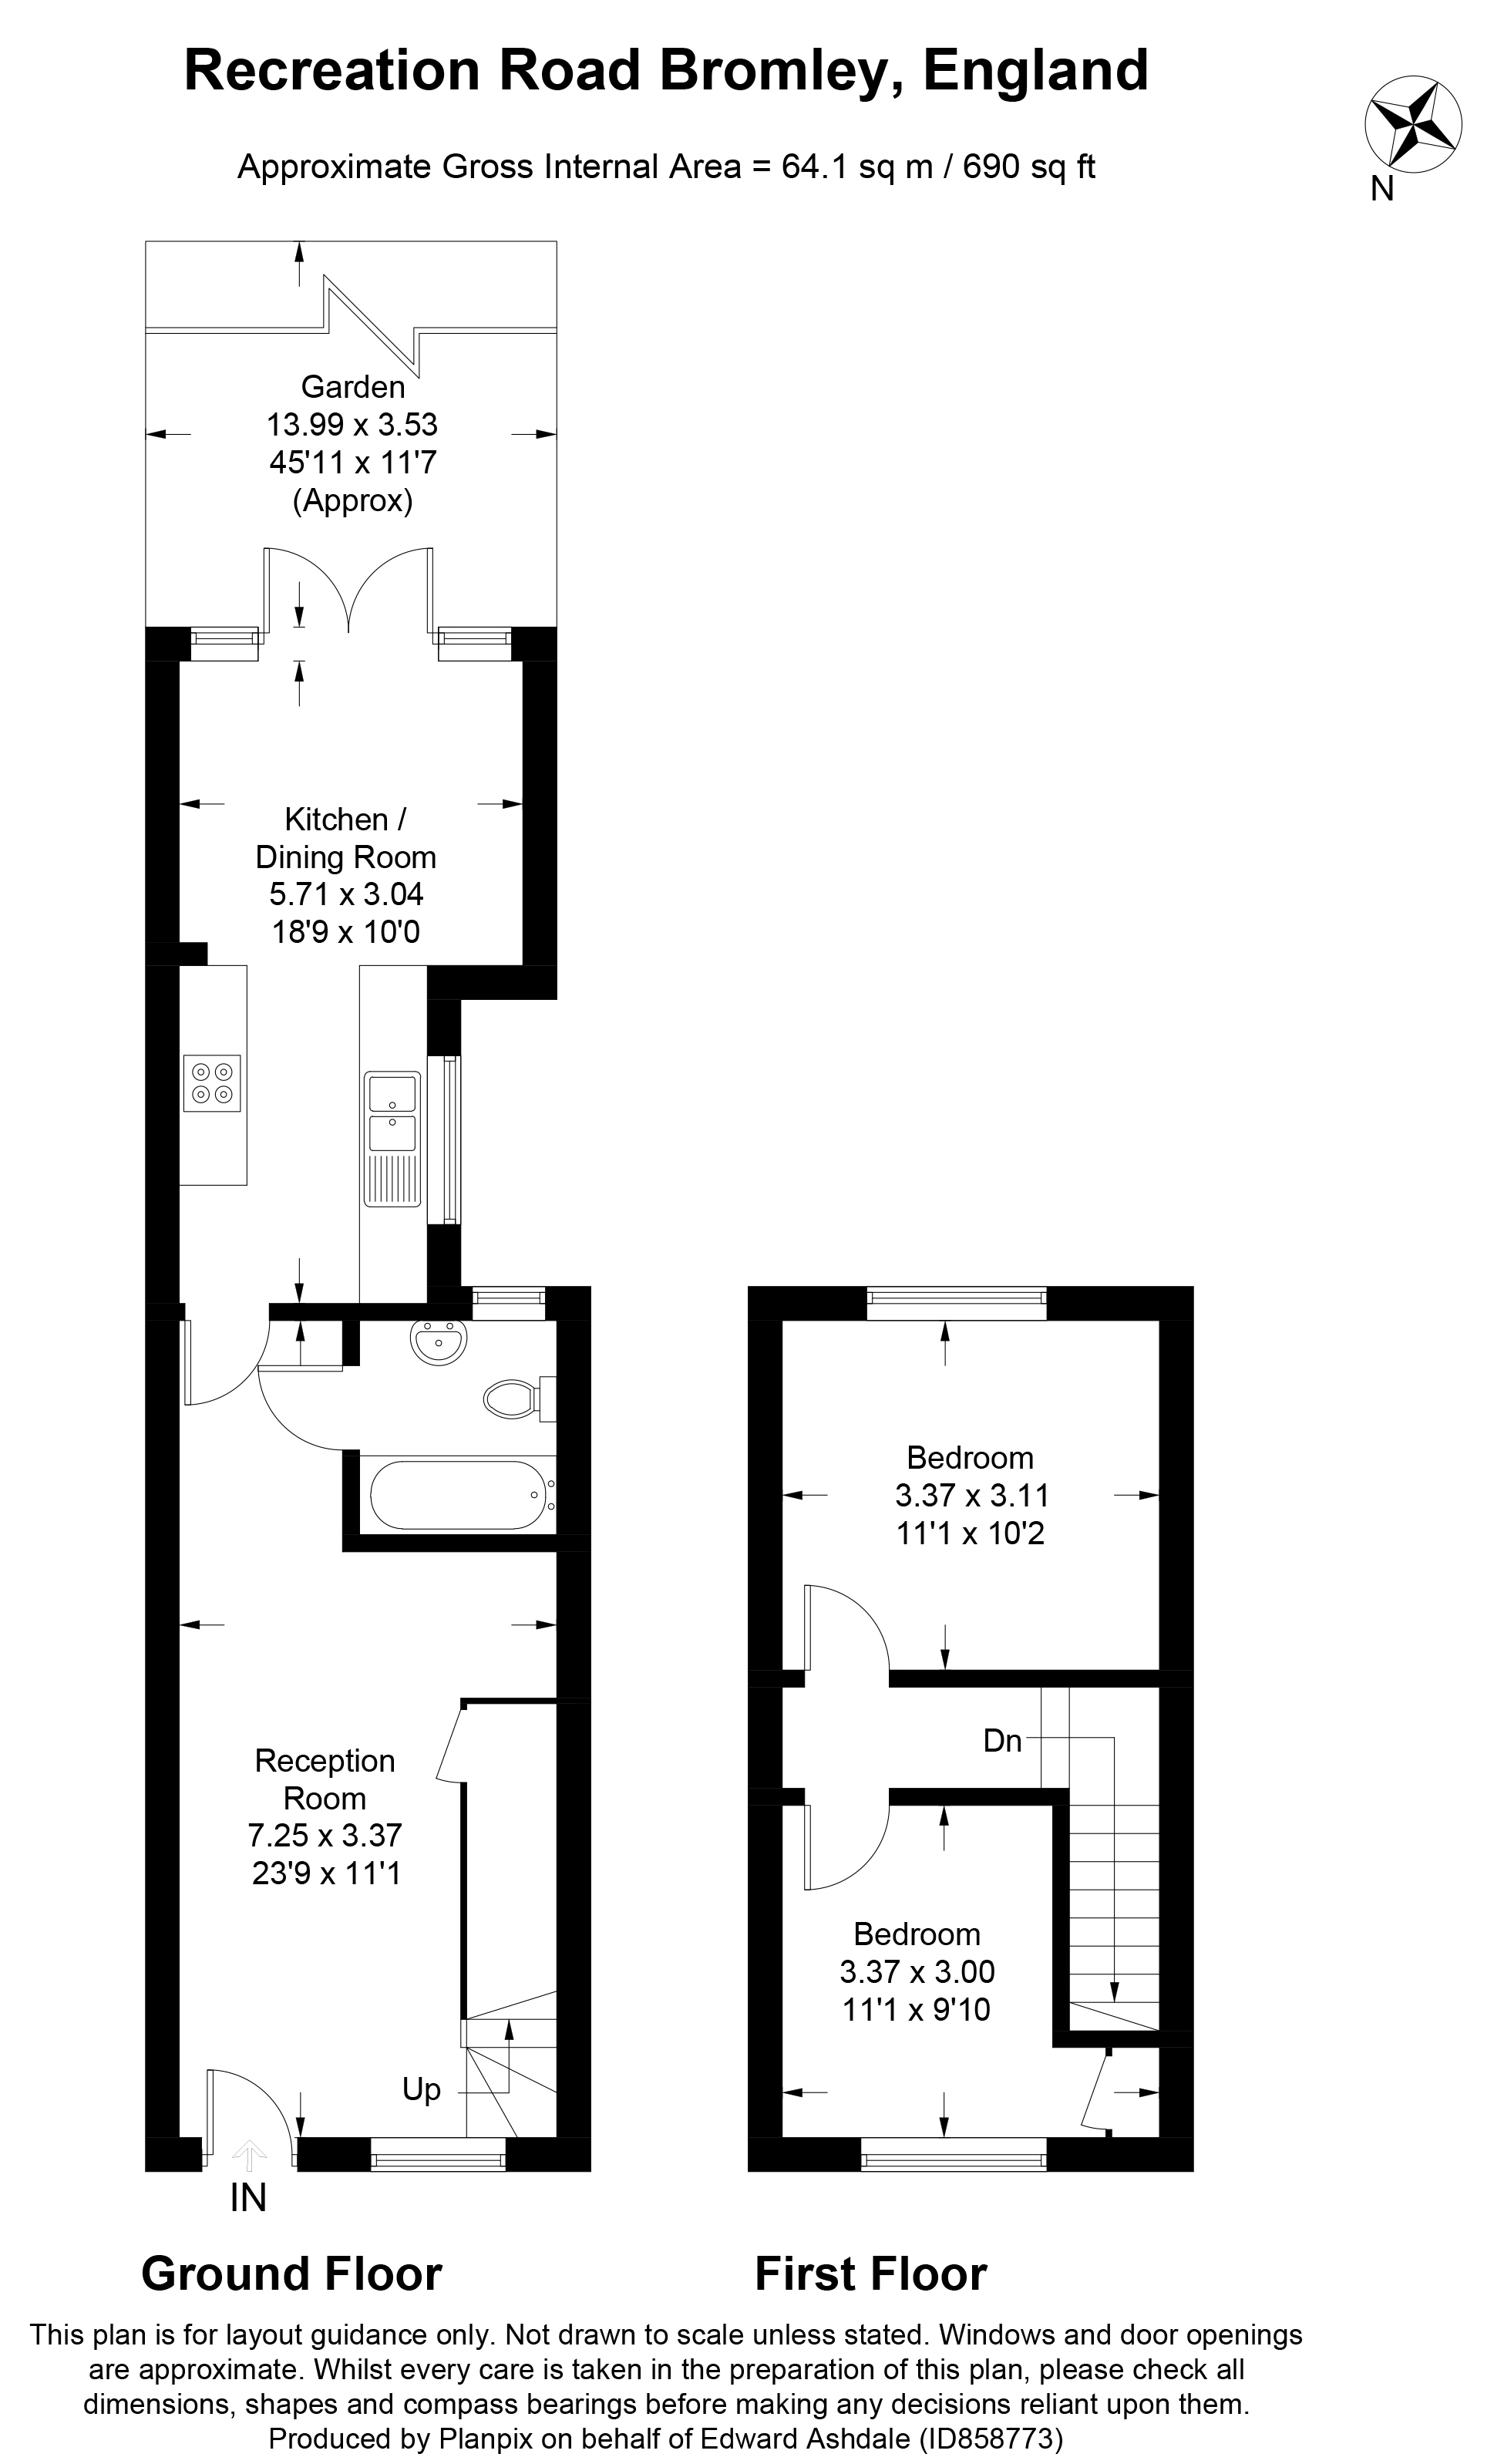 2 bed terraced house for sale in Recreation Road, Bromley - Property floorplan